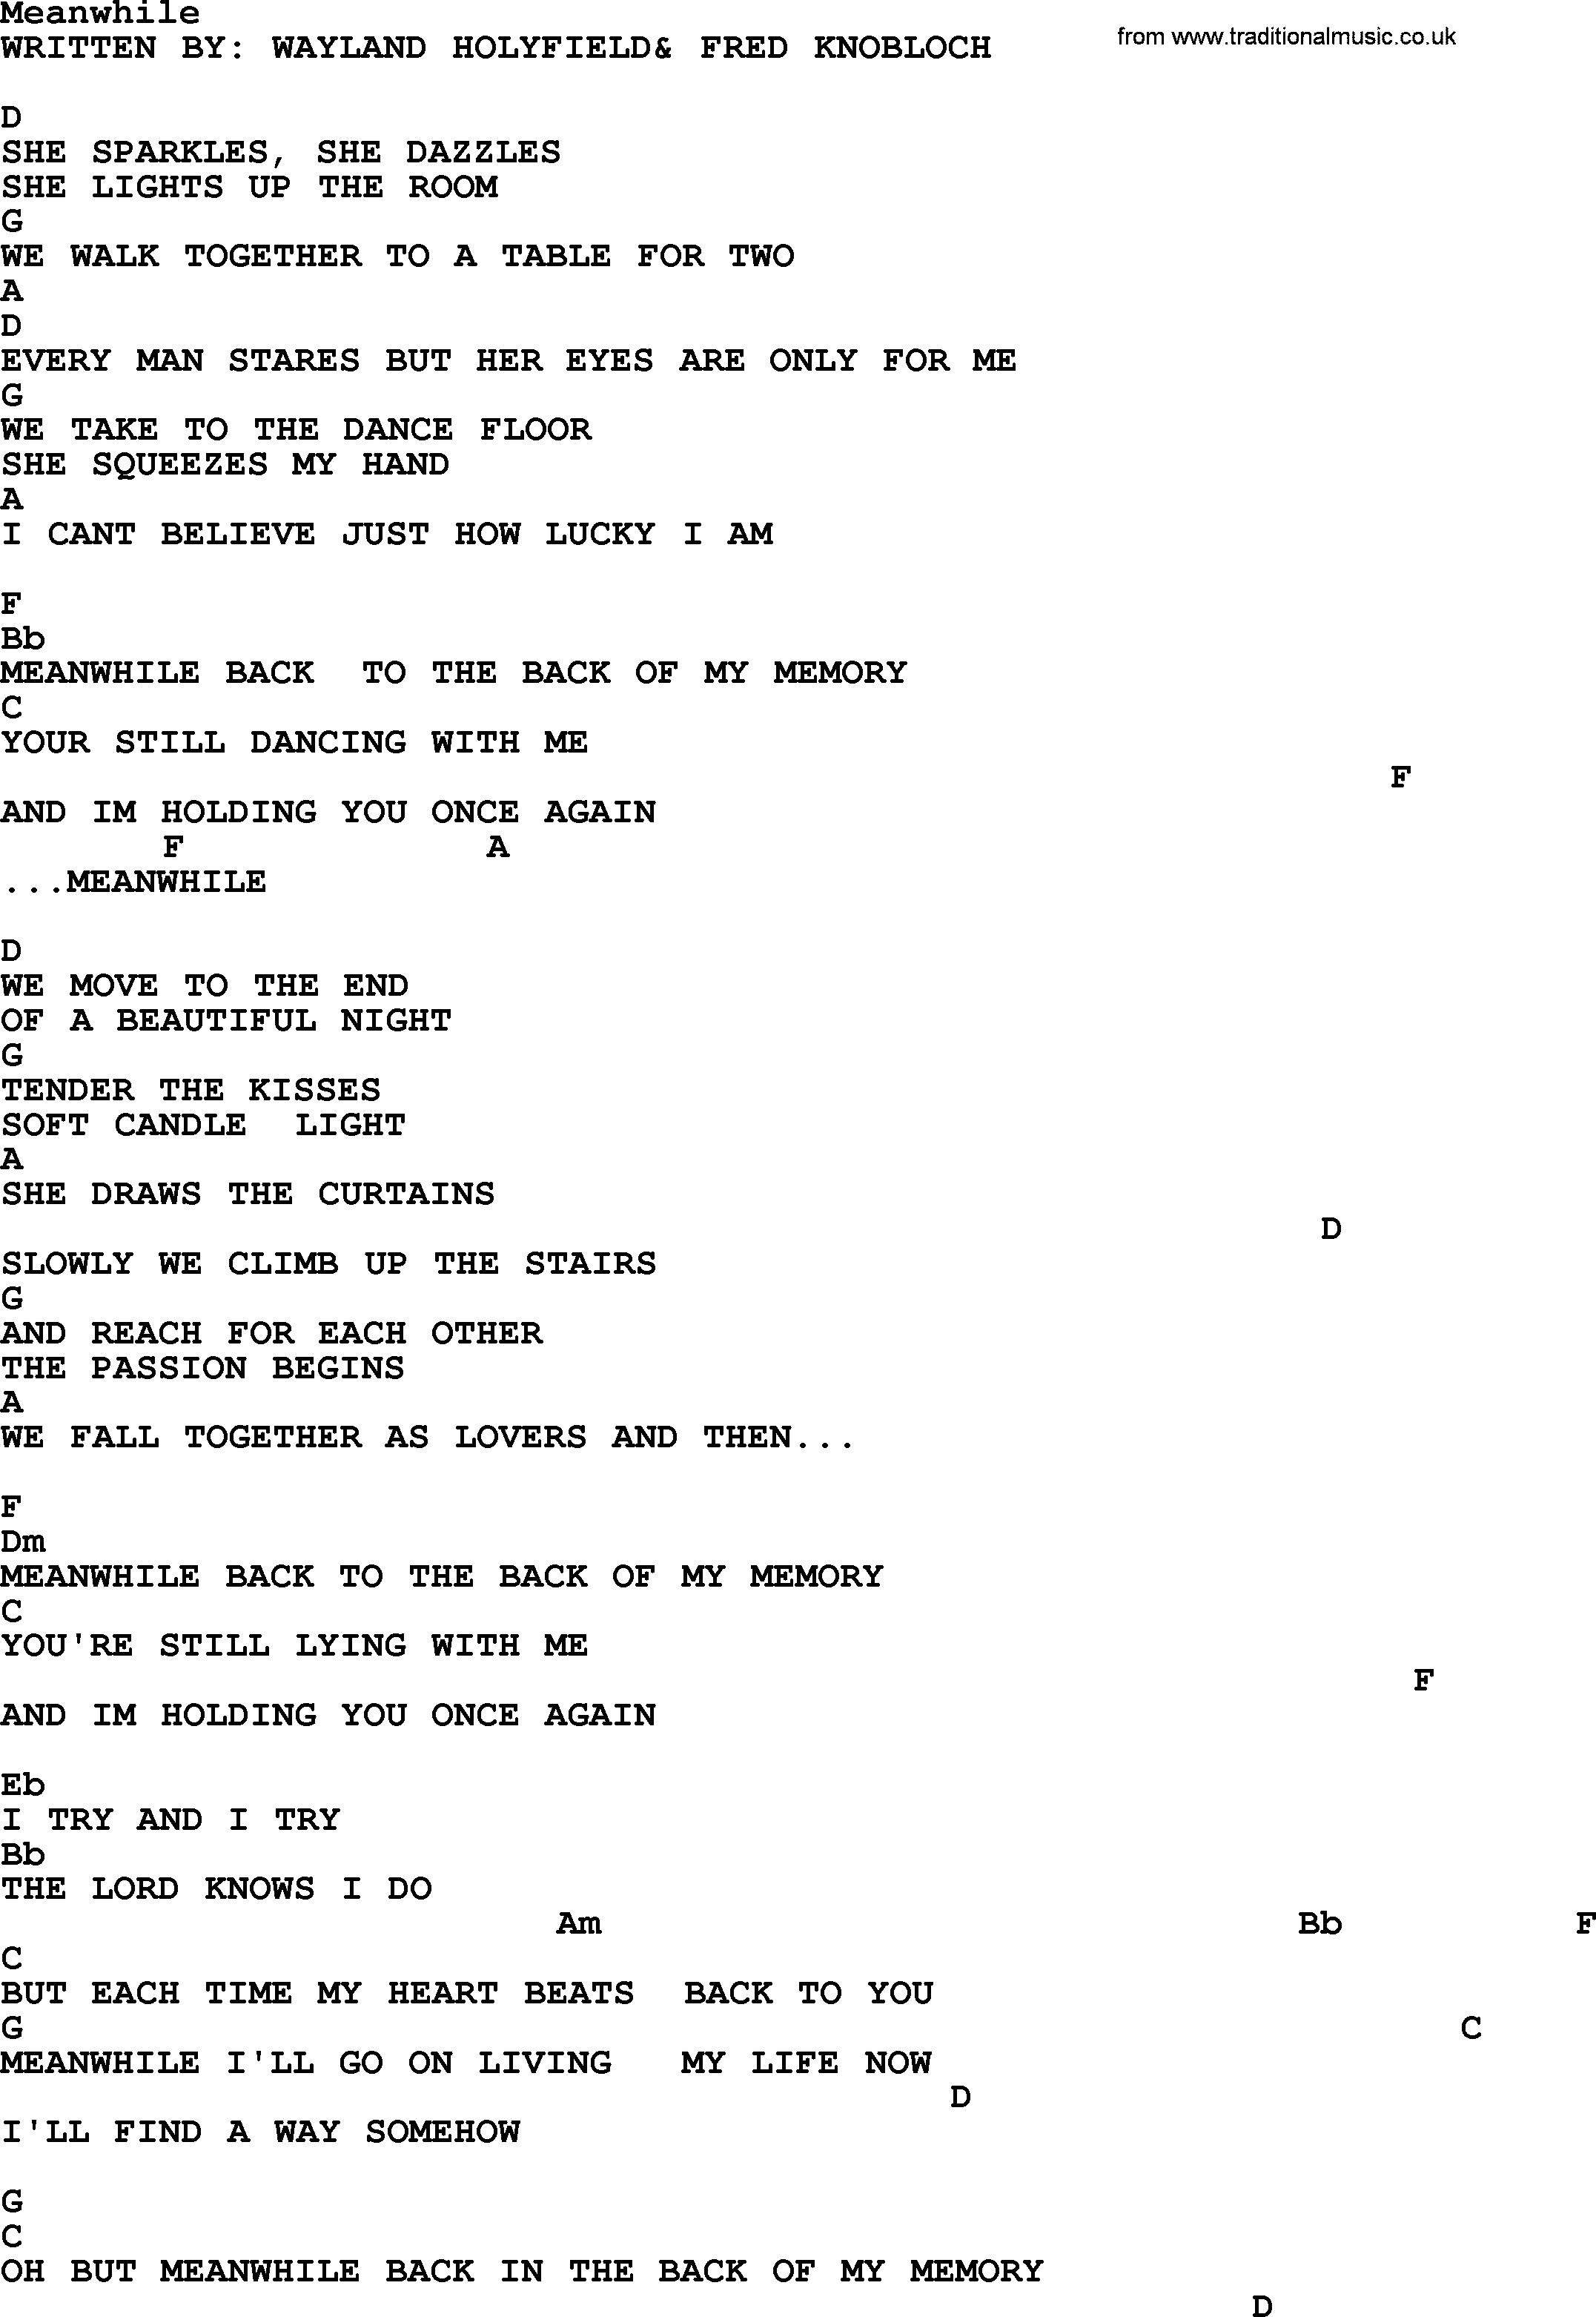 George Strait song: Meanwhile, lyrics and chords